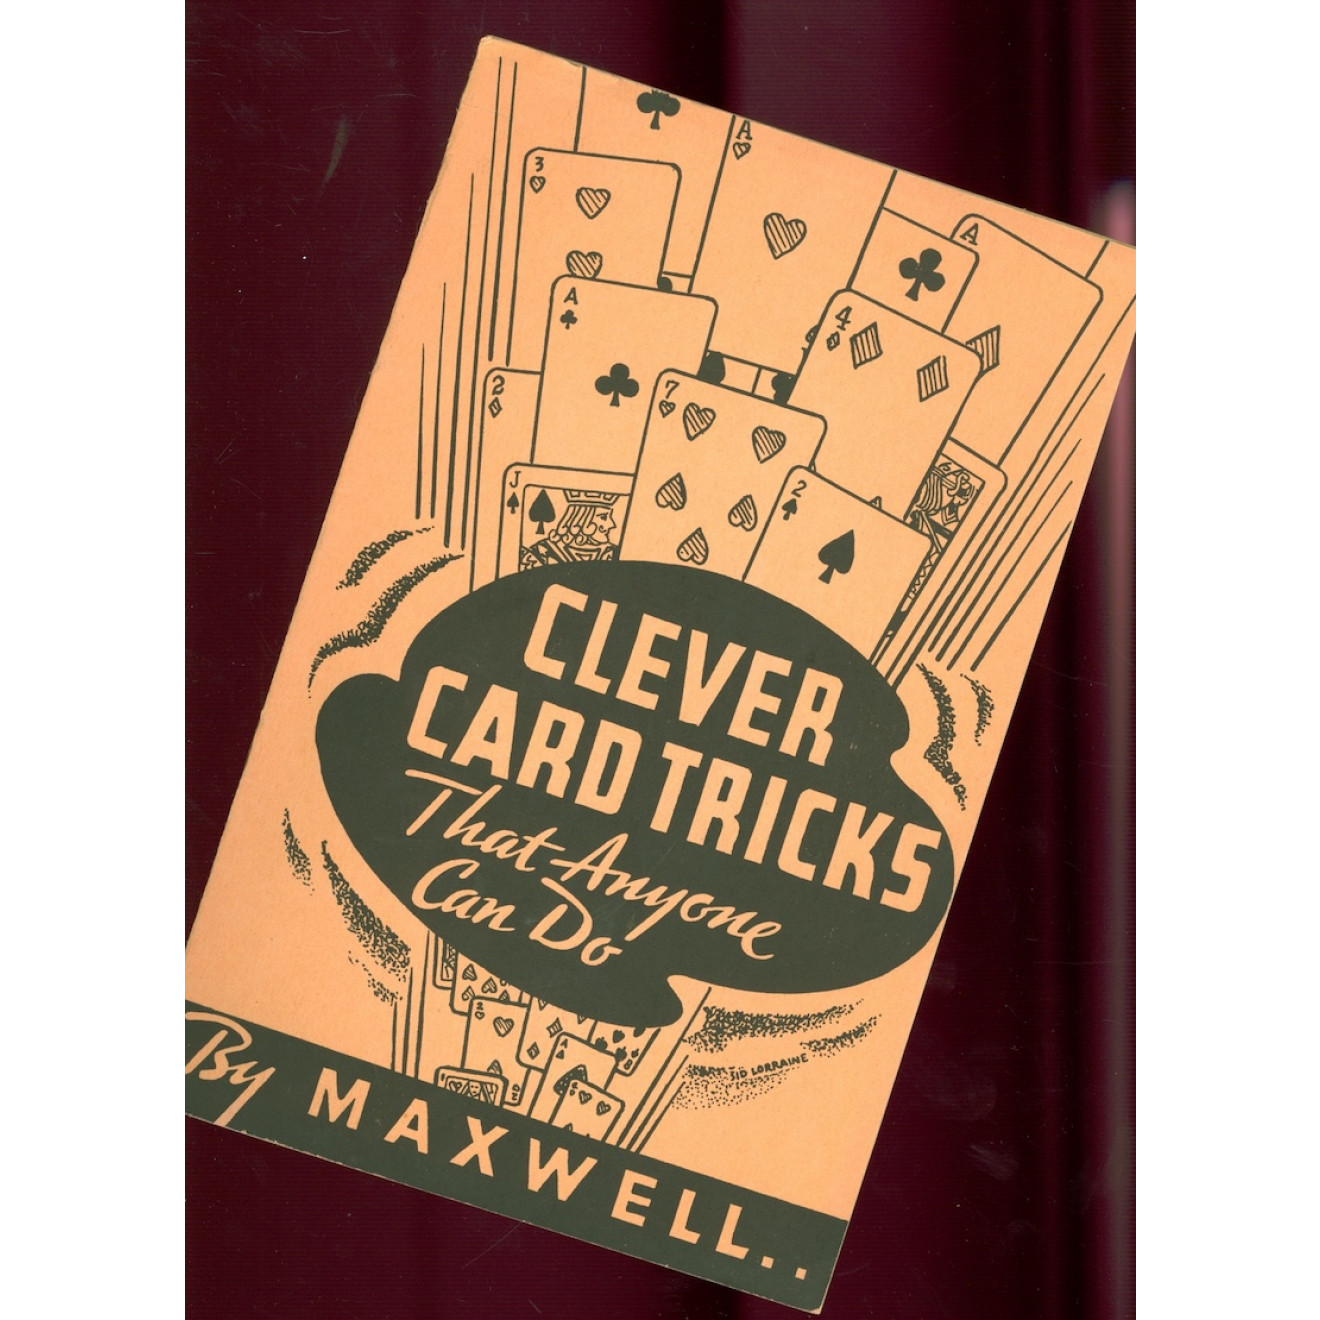 Clever Card Tricks